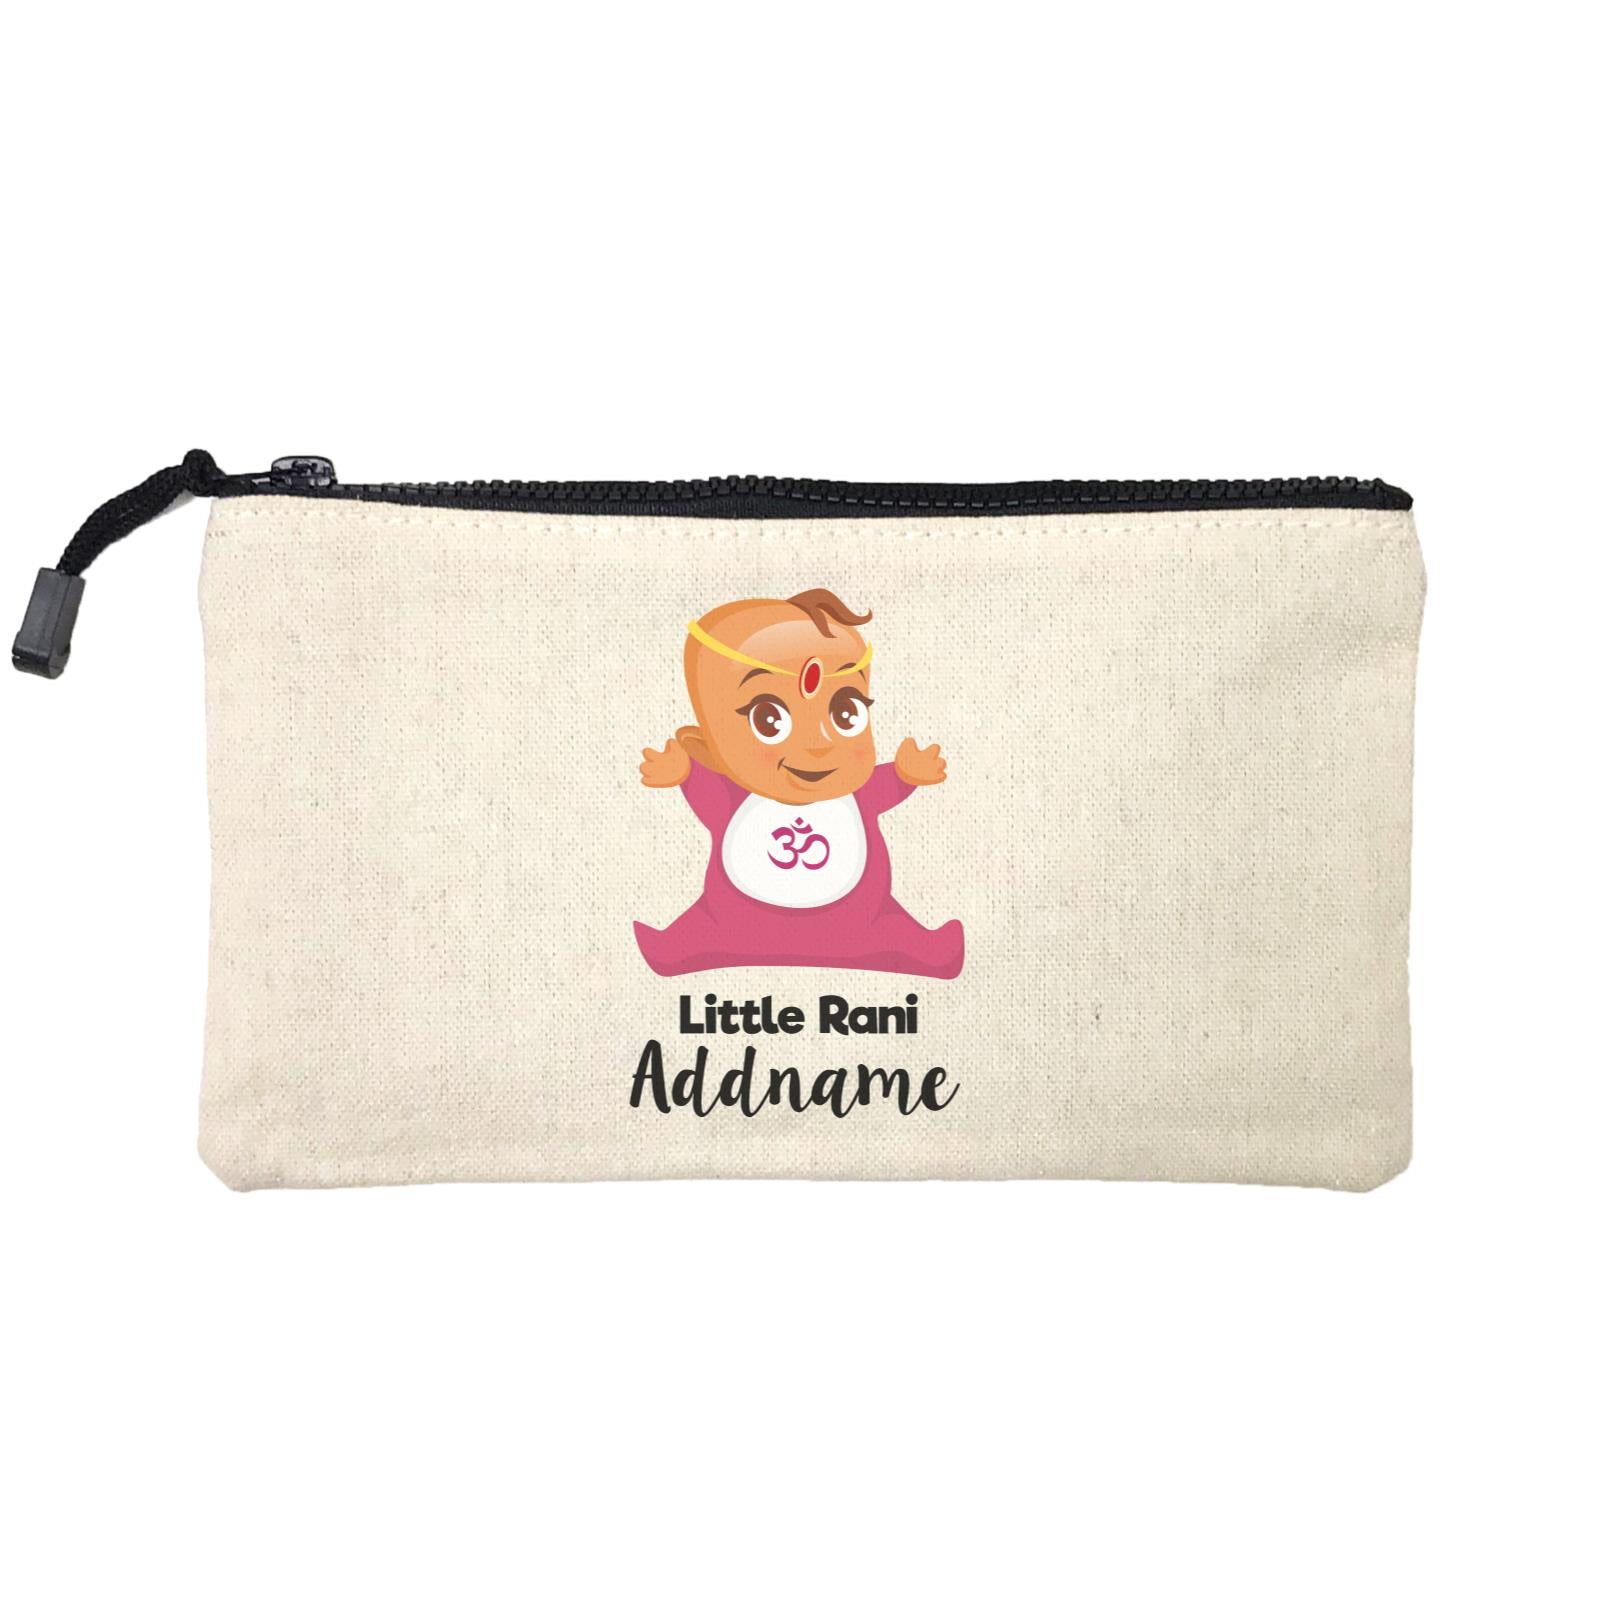 Little Rani Baby Addname Mini Accessories Stationery Pouch